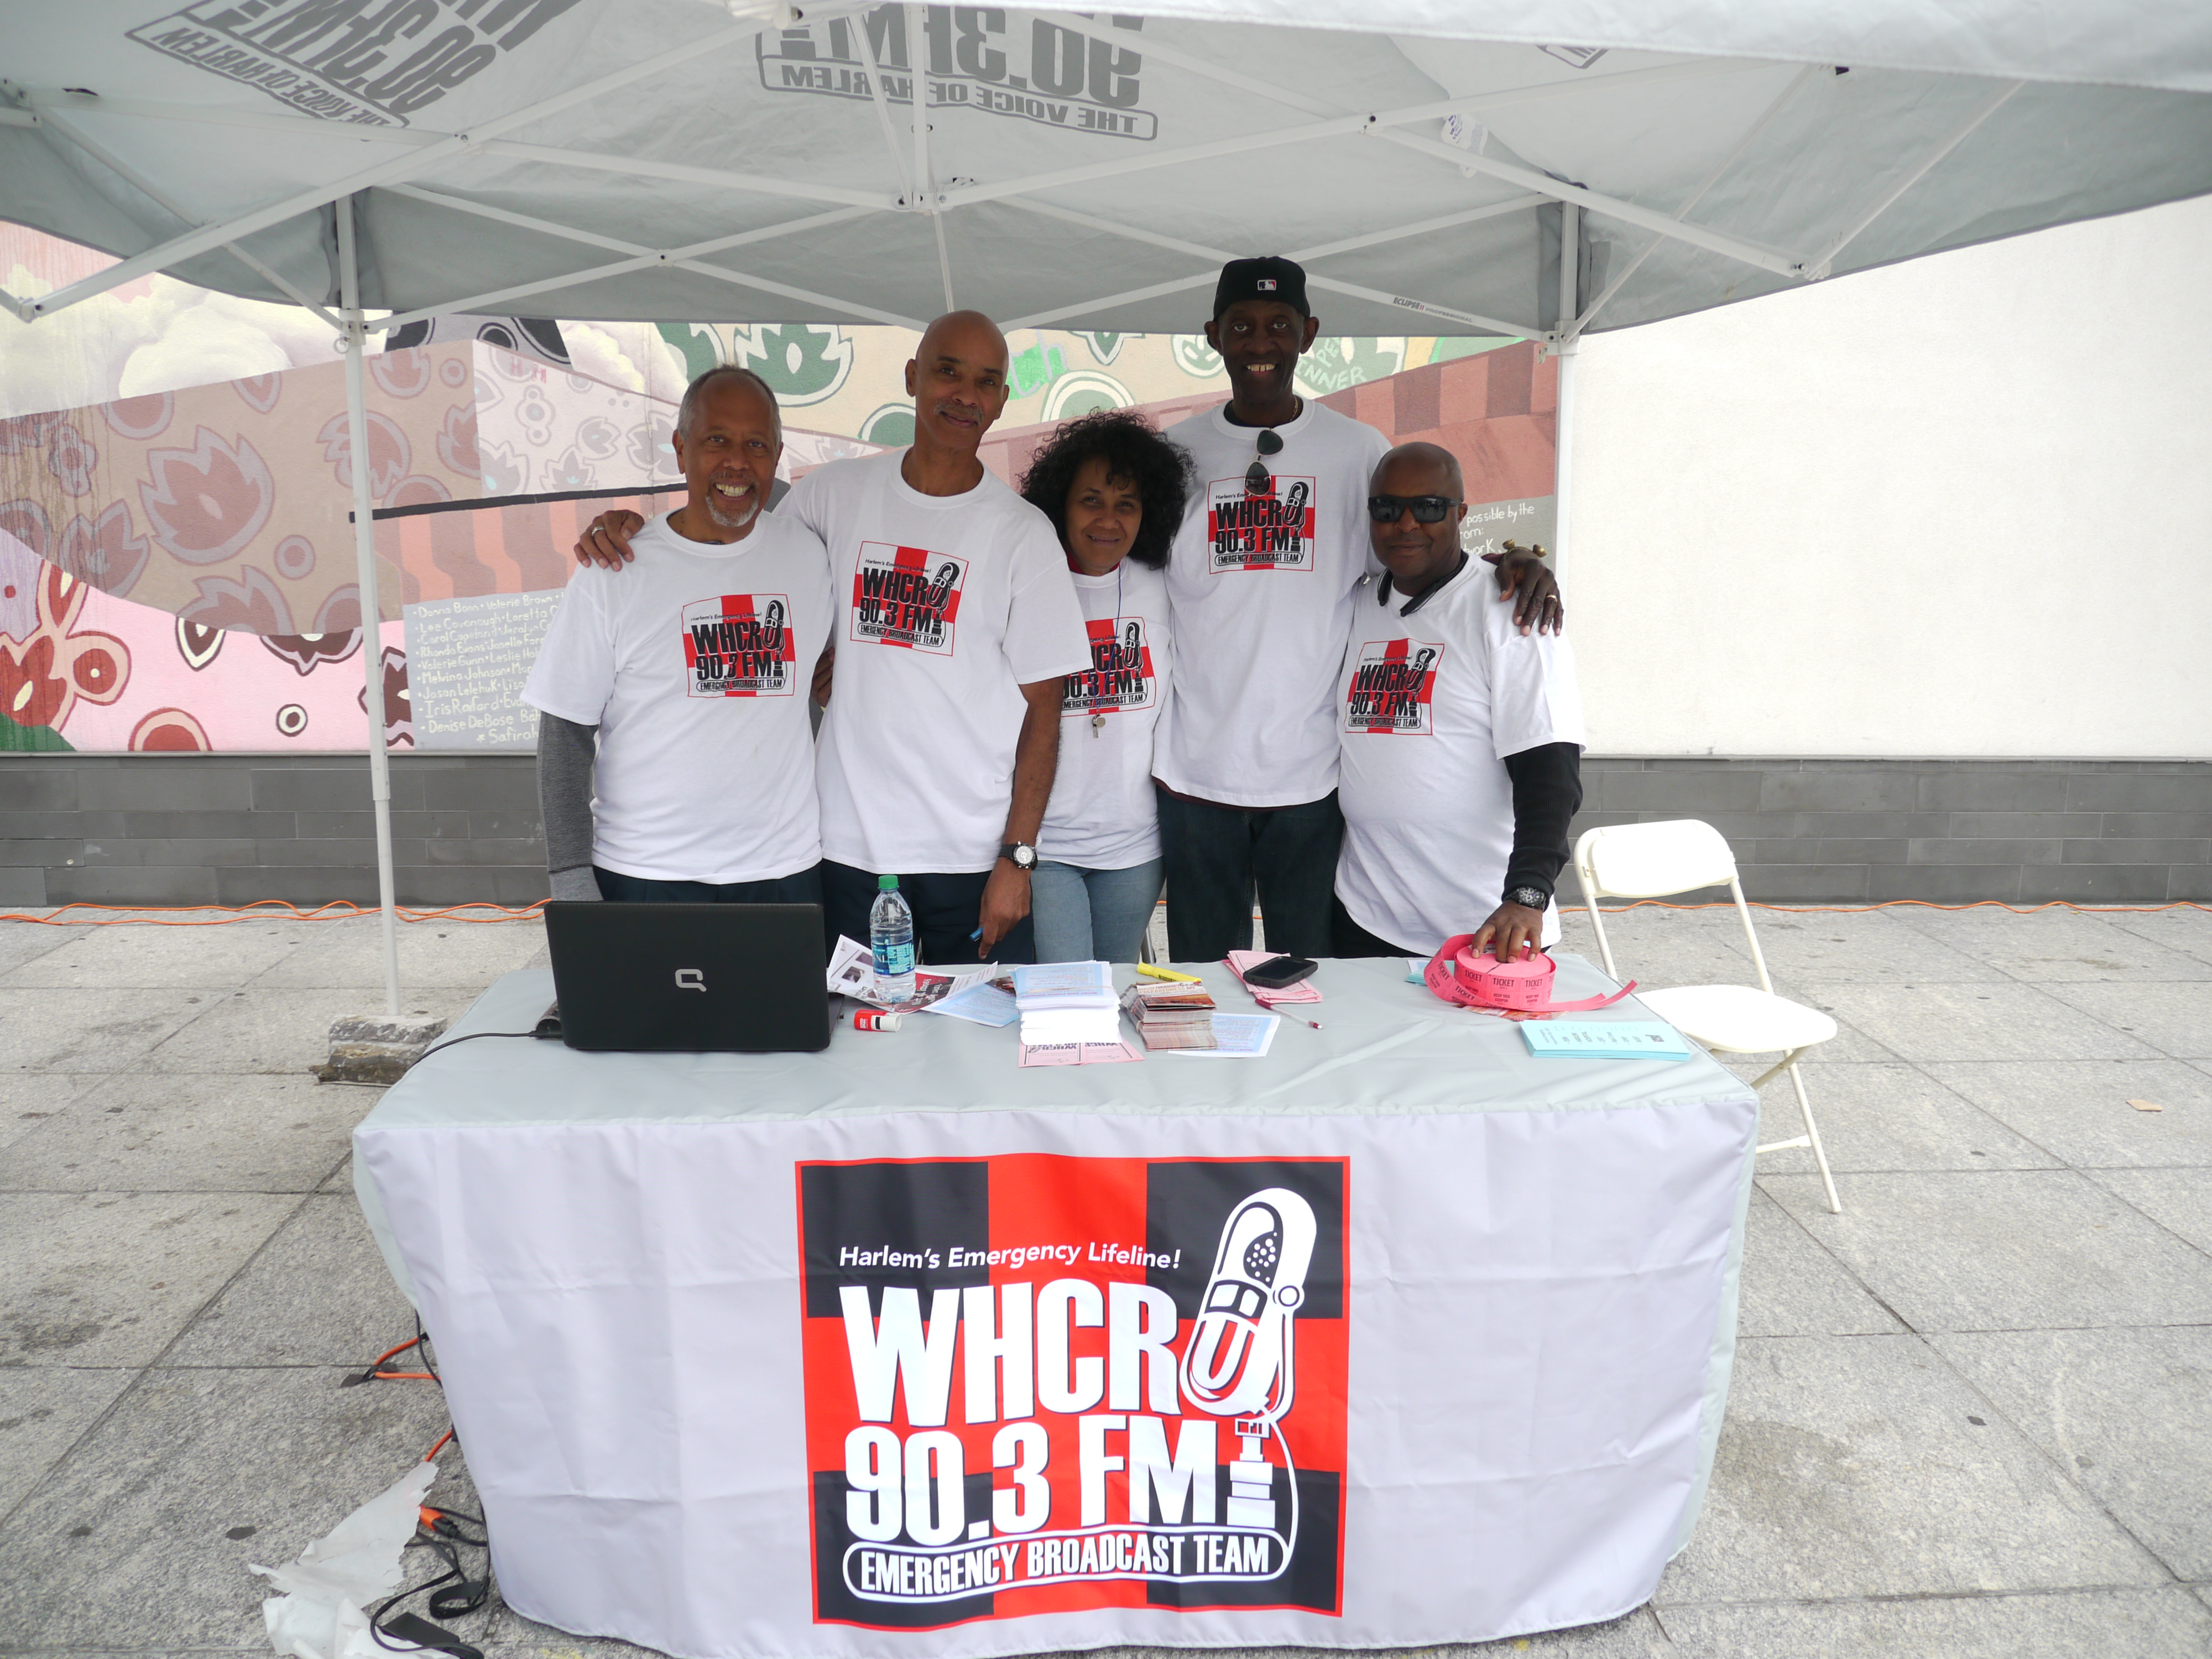 WHCR-90.3FM's WEBT (Emergency Broadcast Team) hosted its 3rd annual Harlem Emergency Preparedness Day along with The City College of New York and Harlem Hospital Center on Tuesday, Sept. 22, 2015, 12noon-4pm. Hundreds passed through and got life saving disaster preparedness information from several organizations.